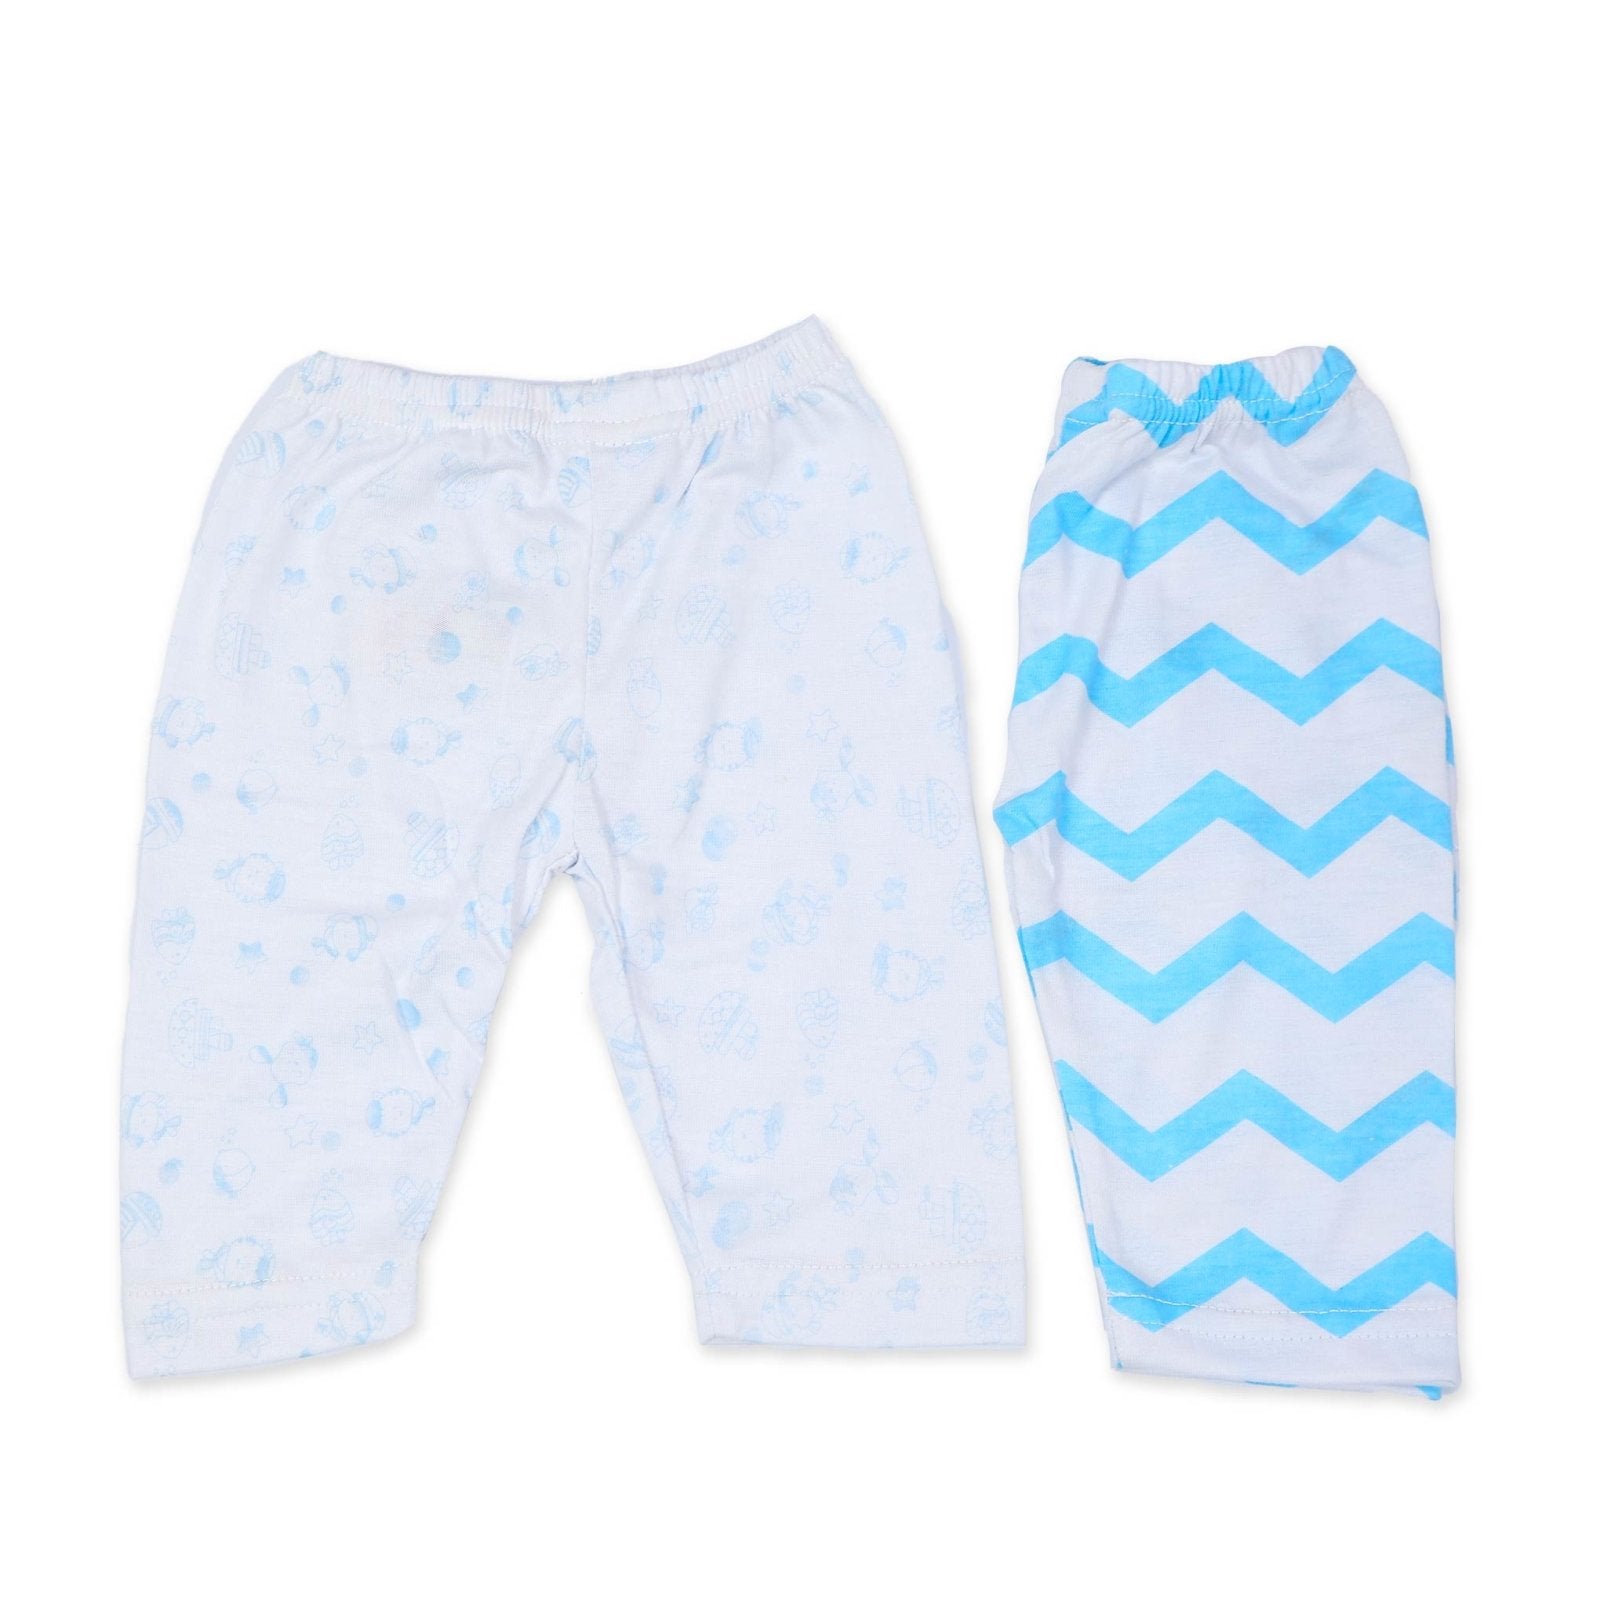 Pajama Set of 2 White & Blue Strips by Little Darling